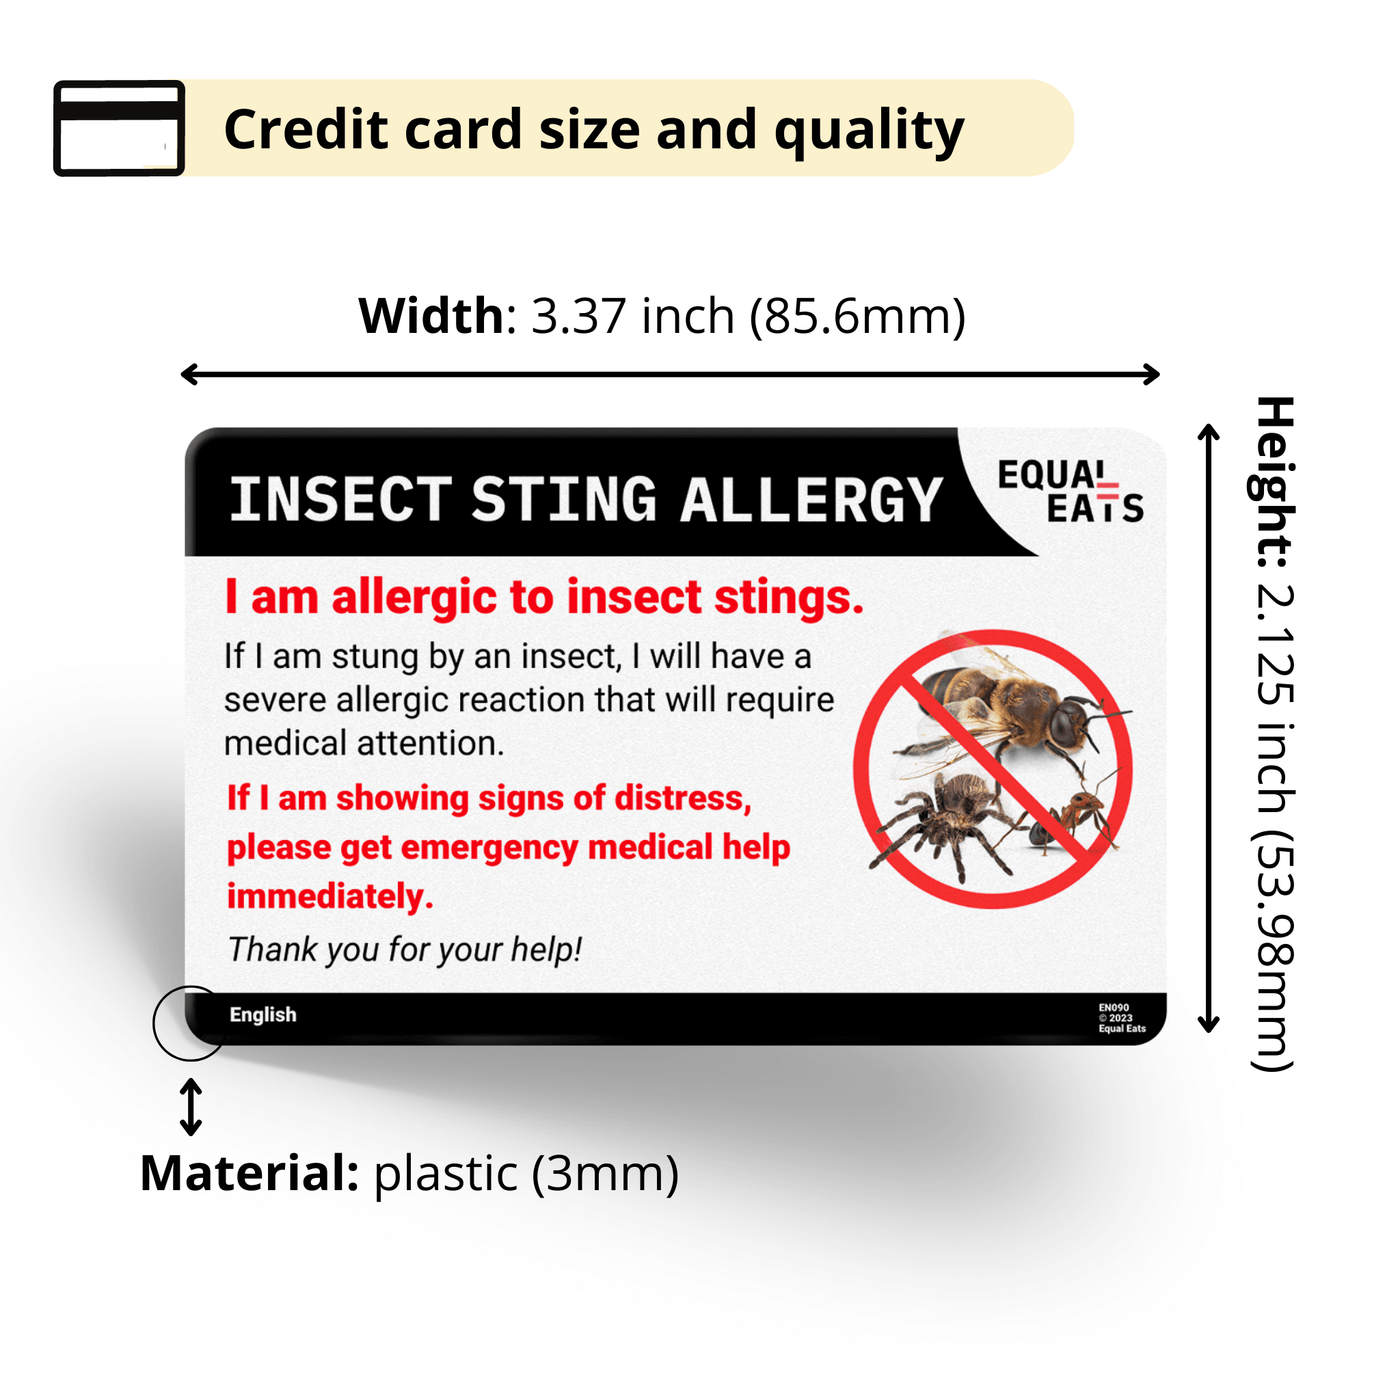 Serbian Insect Sting Allergy Card